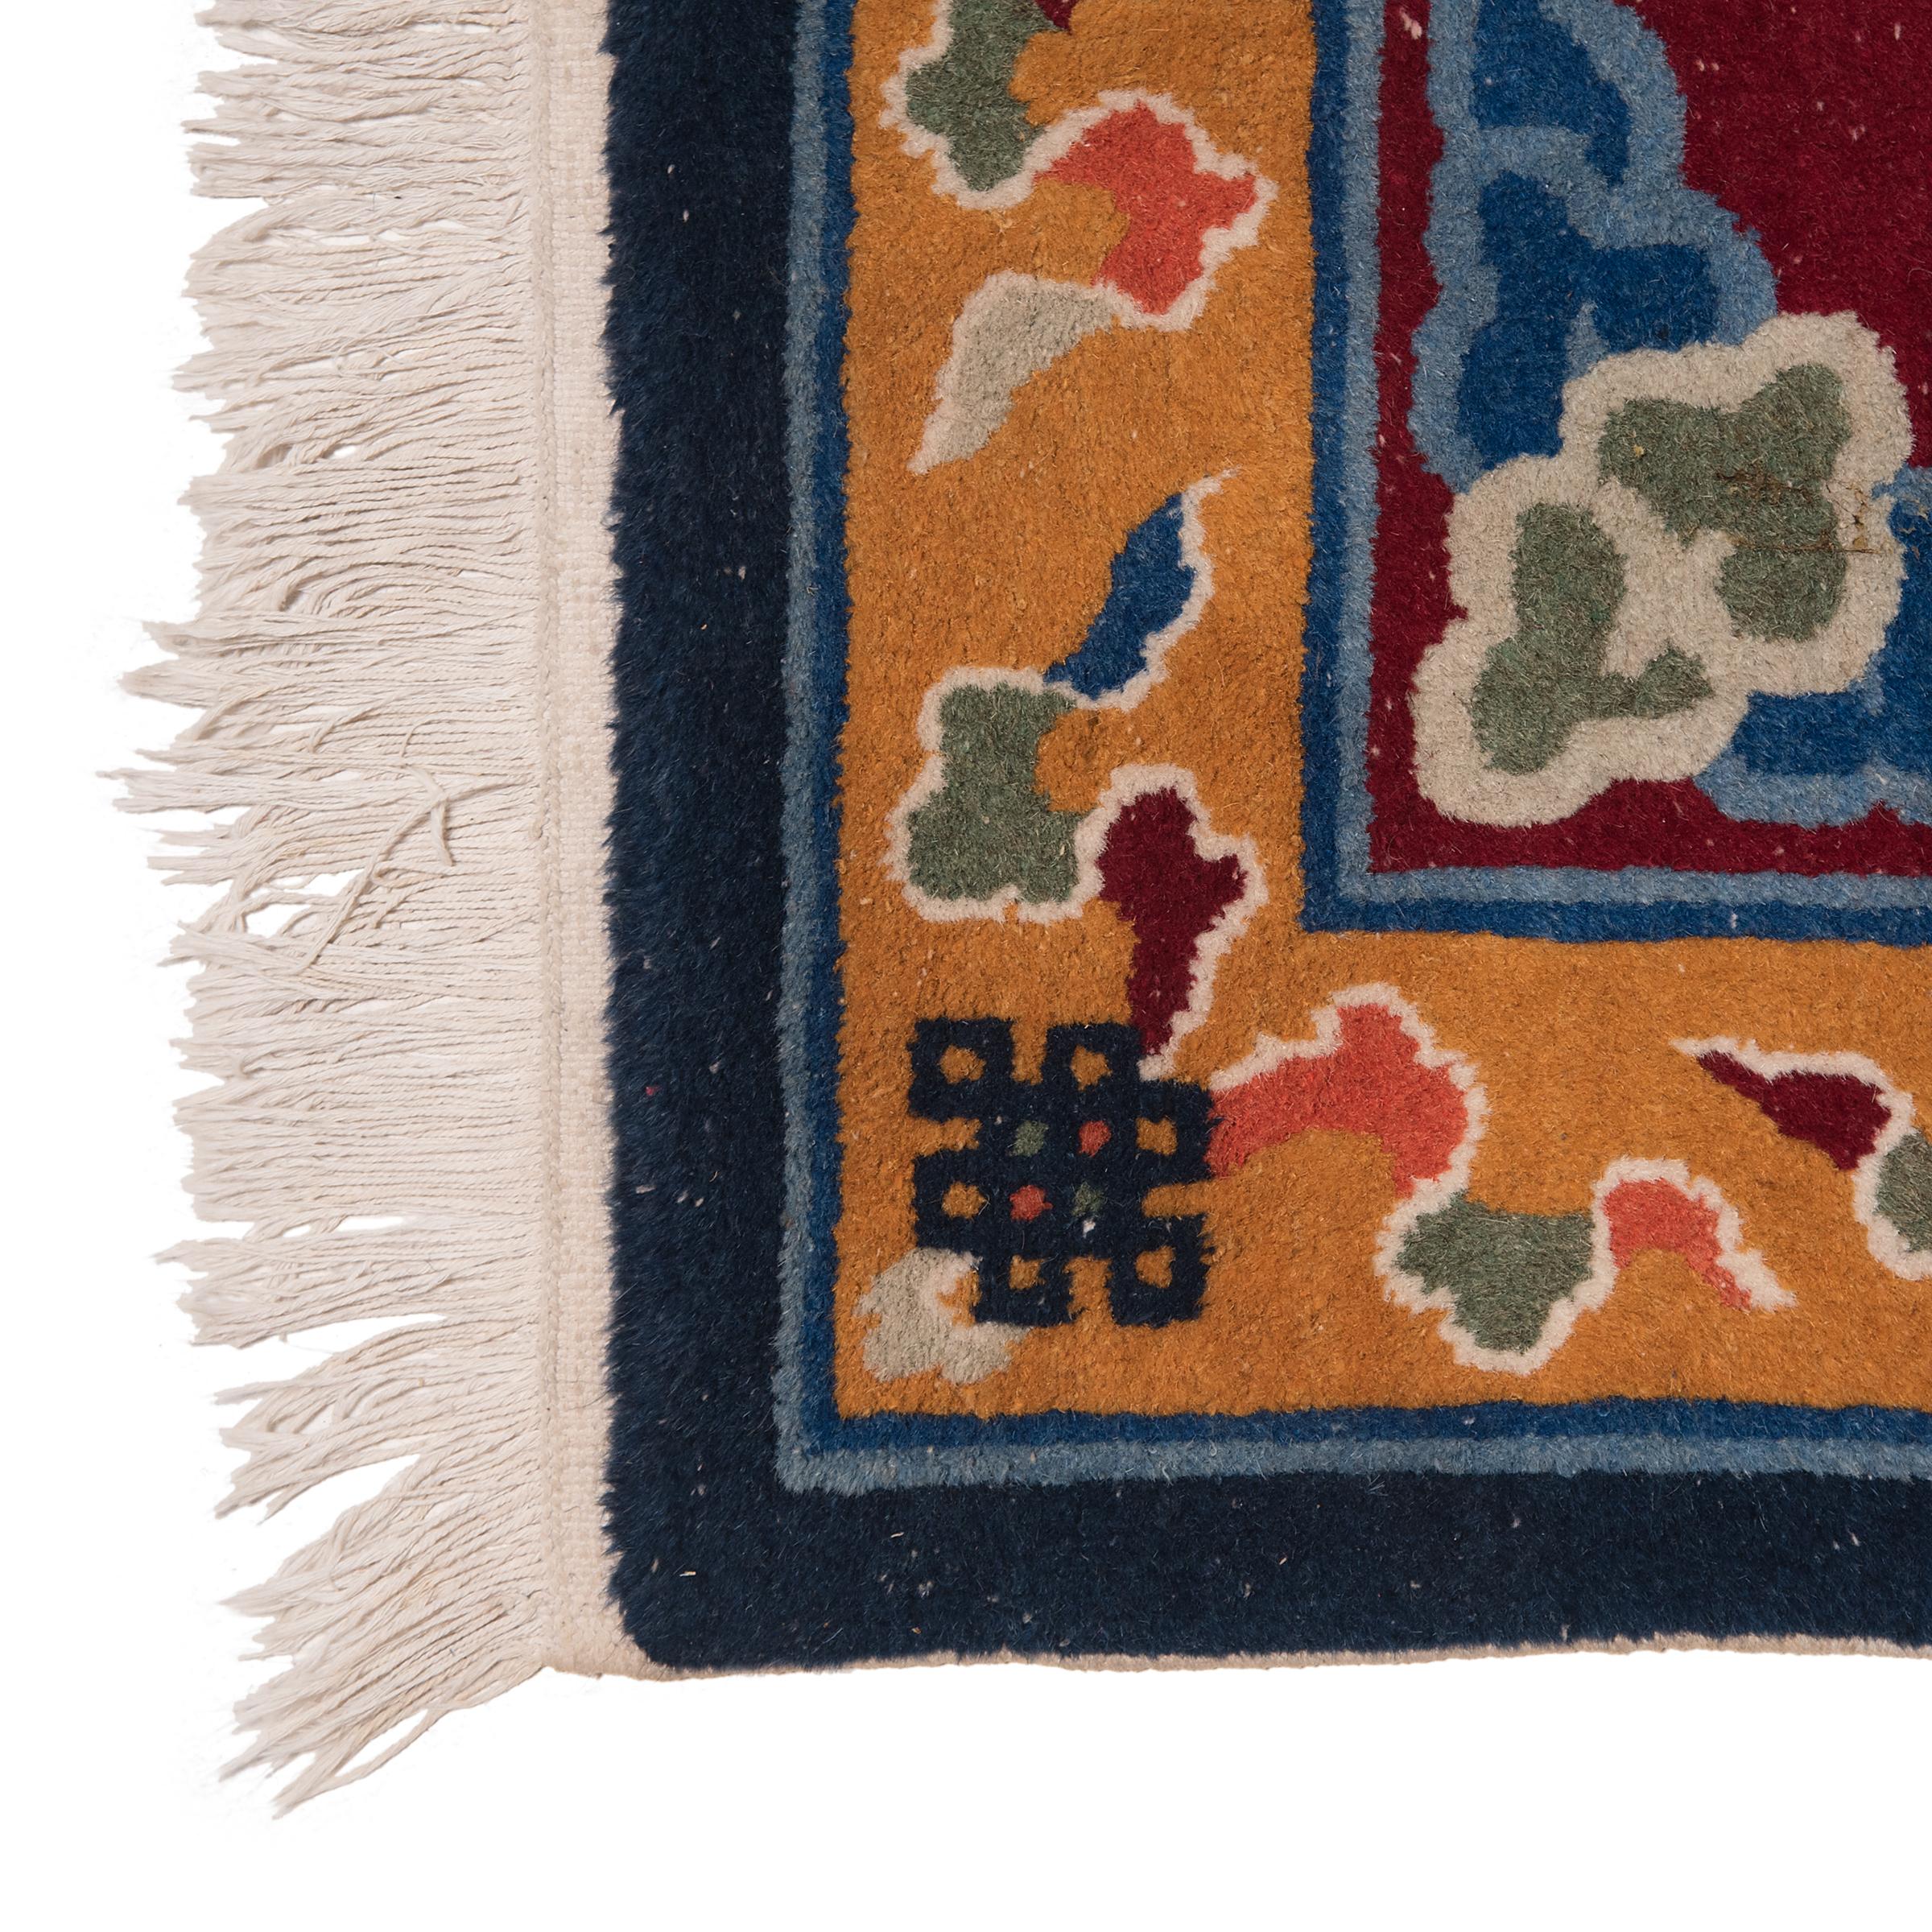 This small rectangular area carpet recreates traditional Chinese carpet designs with a bold color palette of maroon, navy and mustard yellow. Set against the wine-red field is a central medallion of a celestial dragon flying towards a flaming pearl,